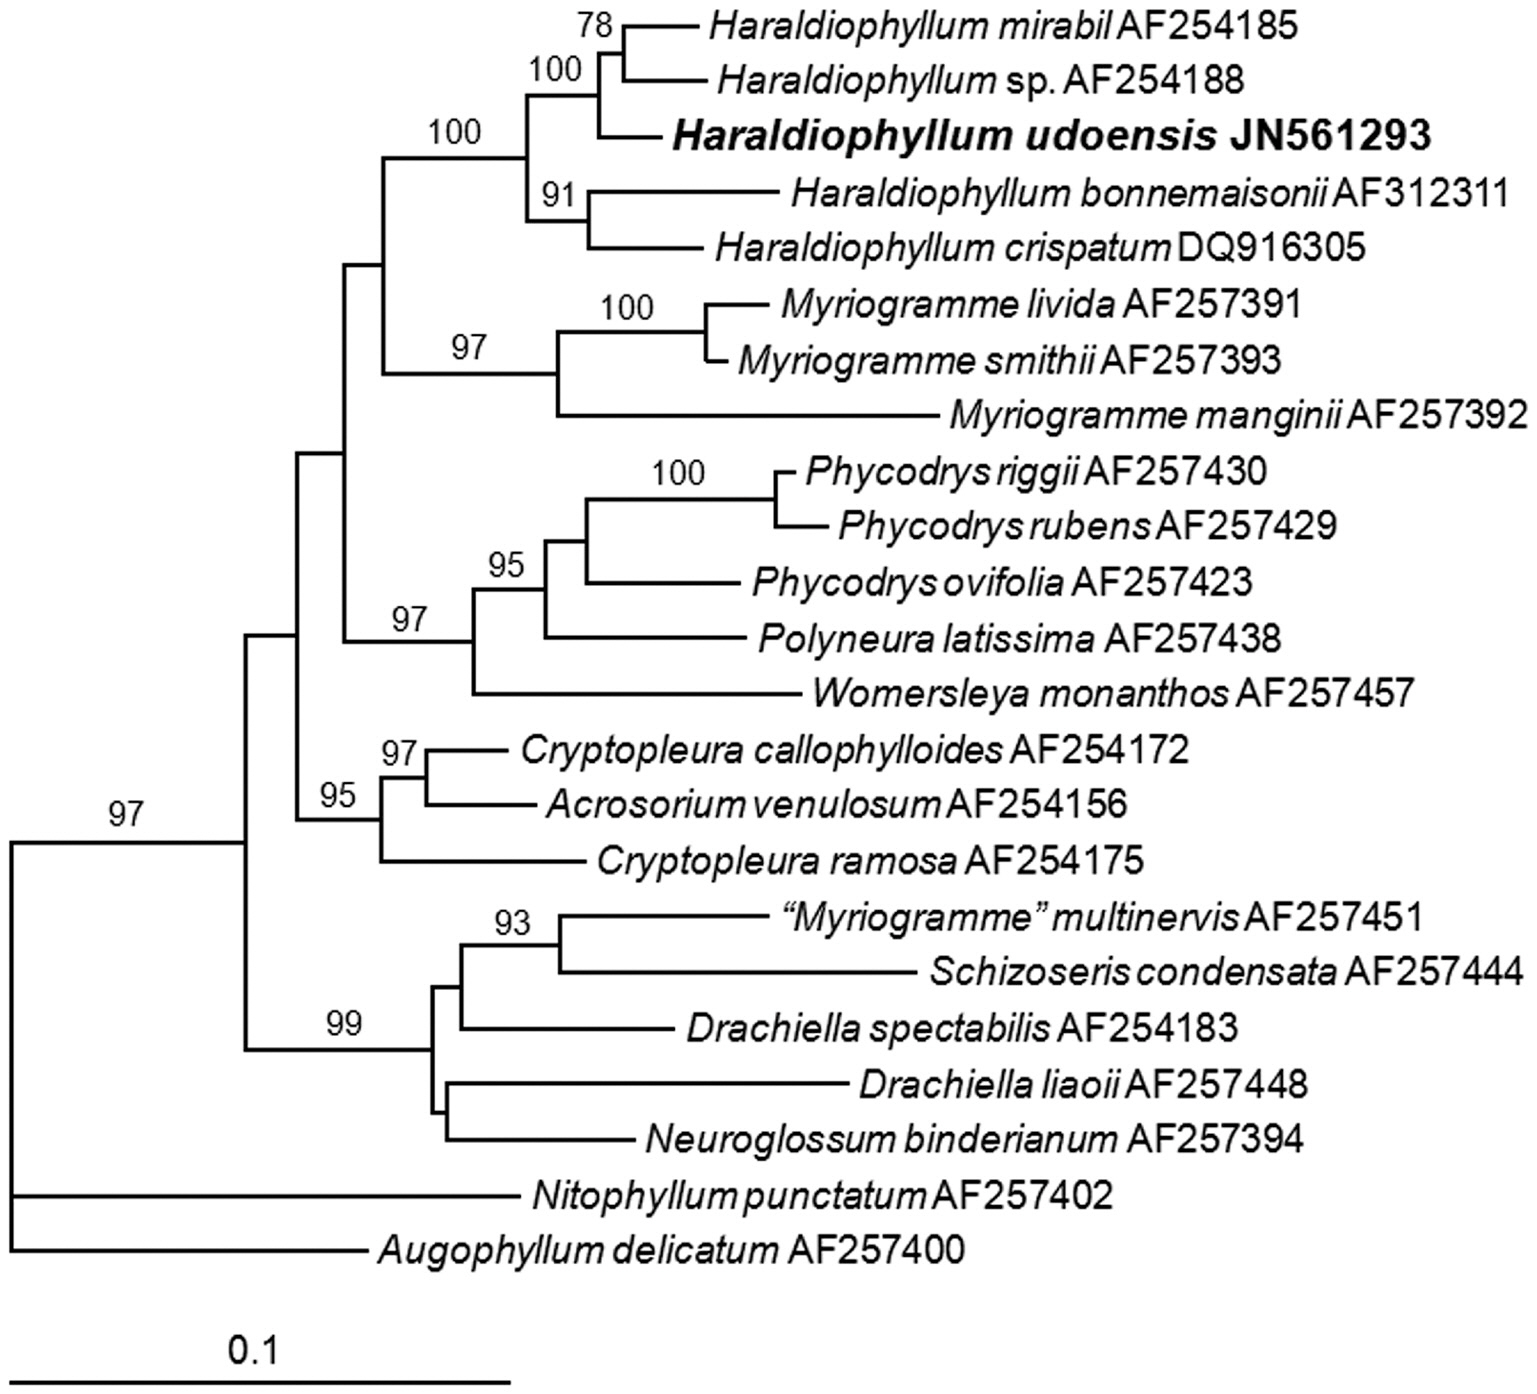 Phylogenetic tree for Haraldiophyllum and relatives derived from maximum likelihood using plastid-encoded rbcL sequence data. The bootstrap values shown above branches are from bootstrap analyses employing 1000 replicated maximum likelihood searches.